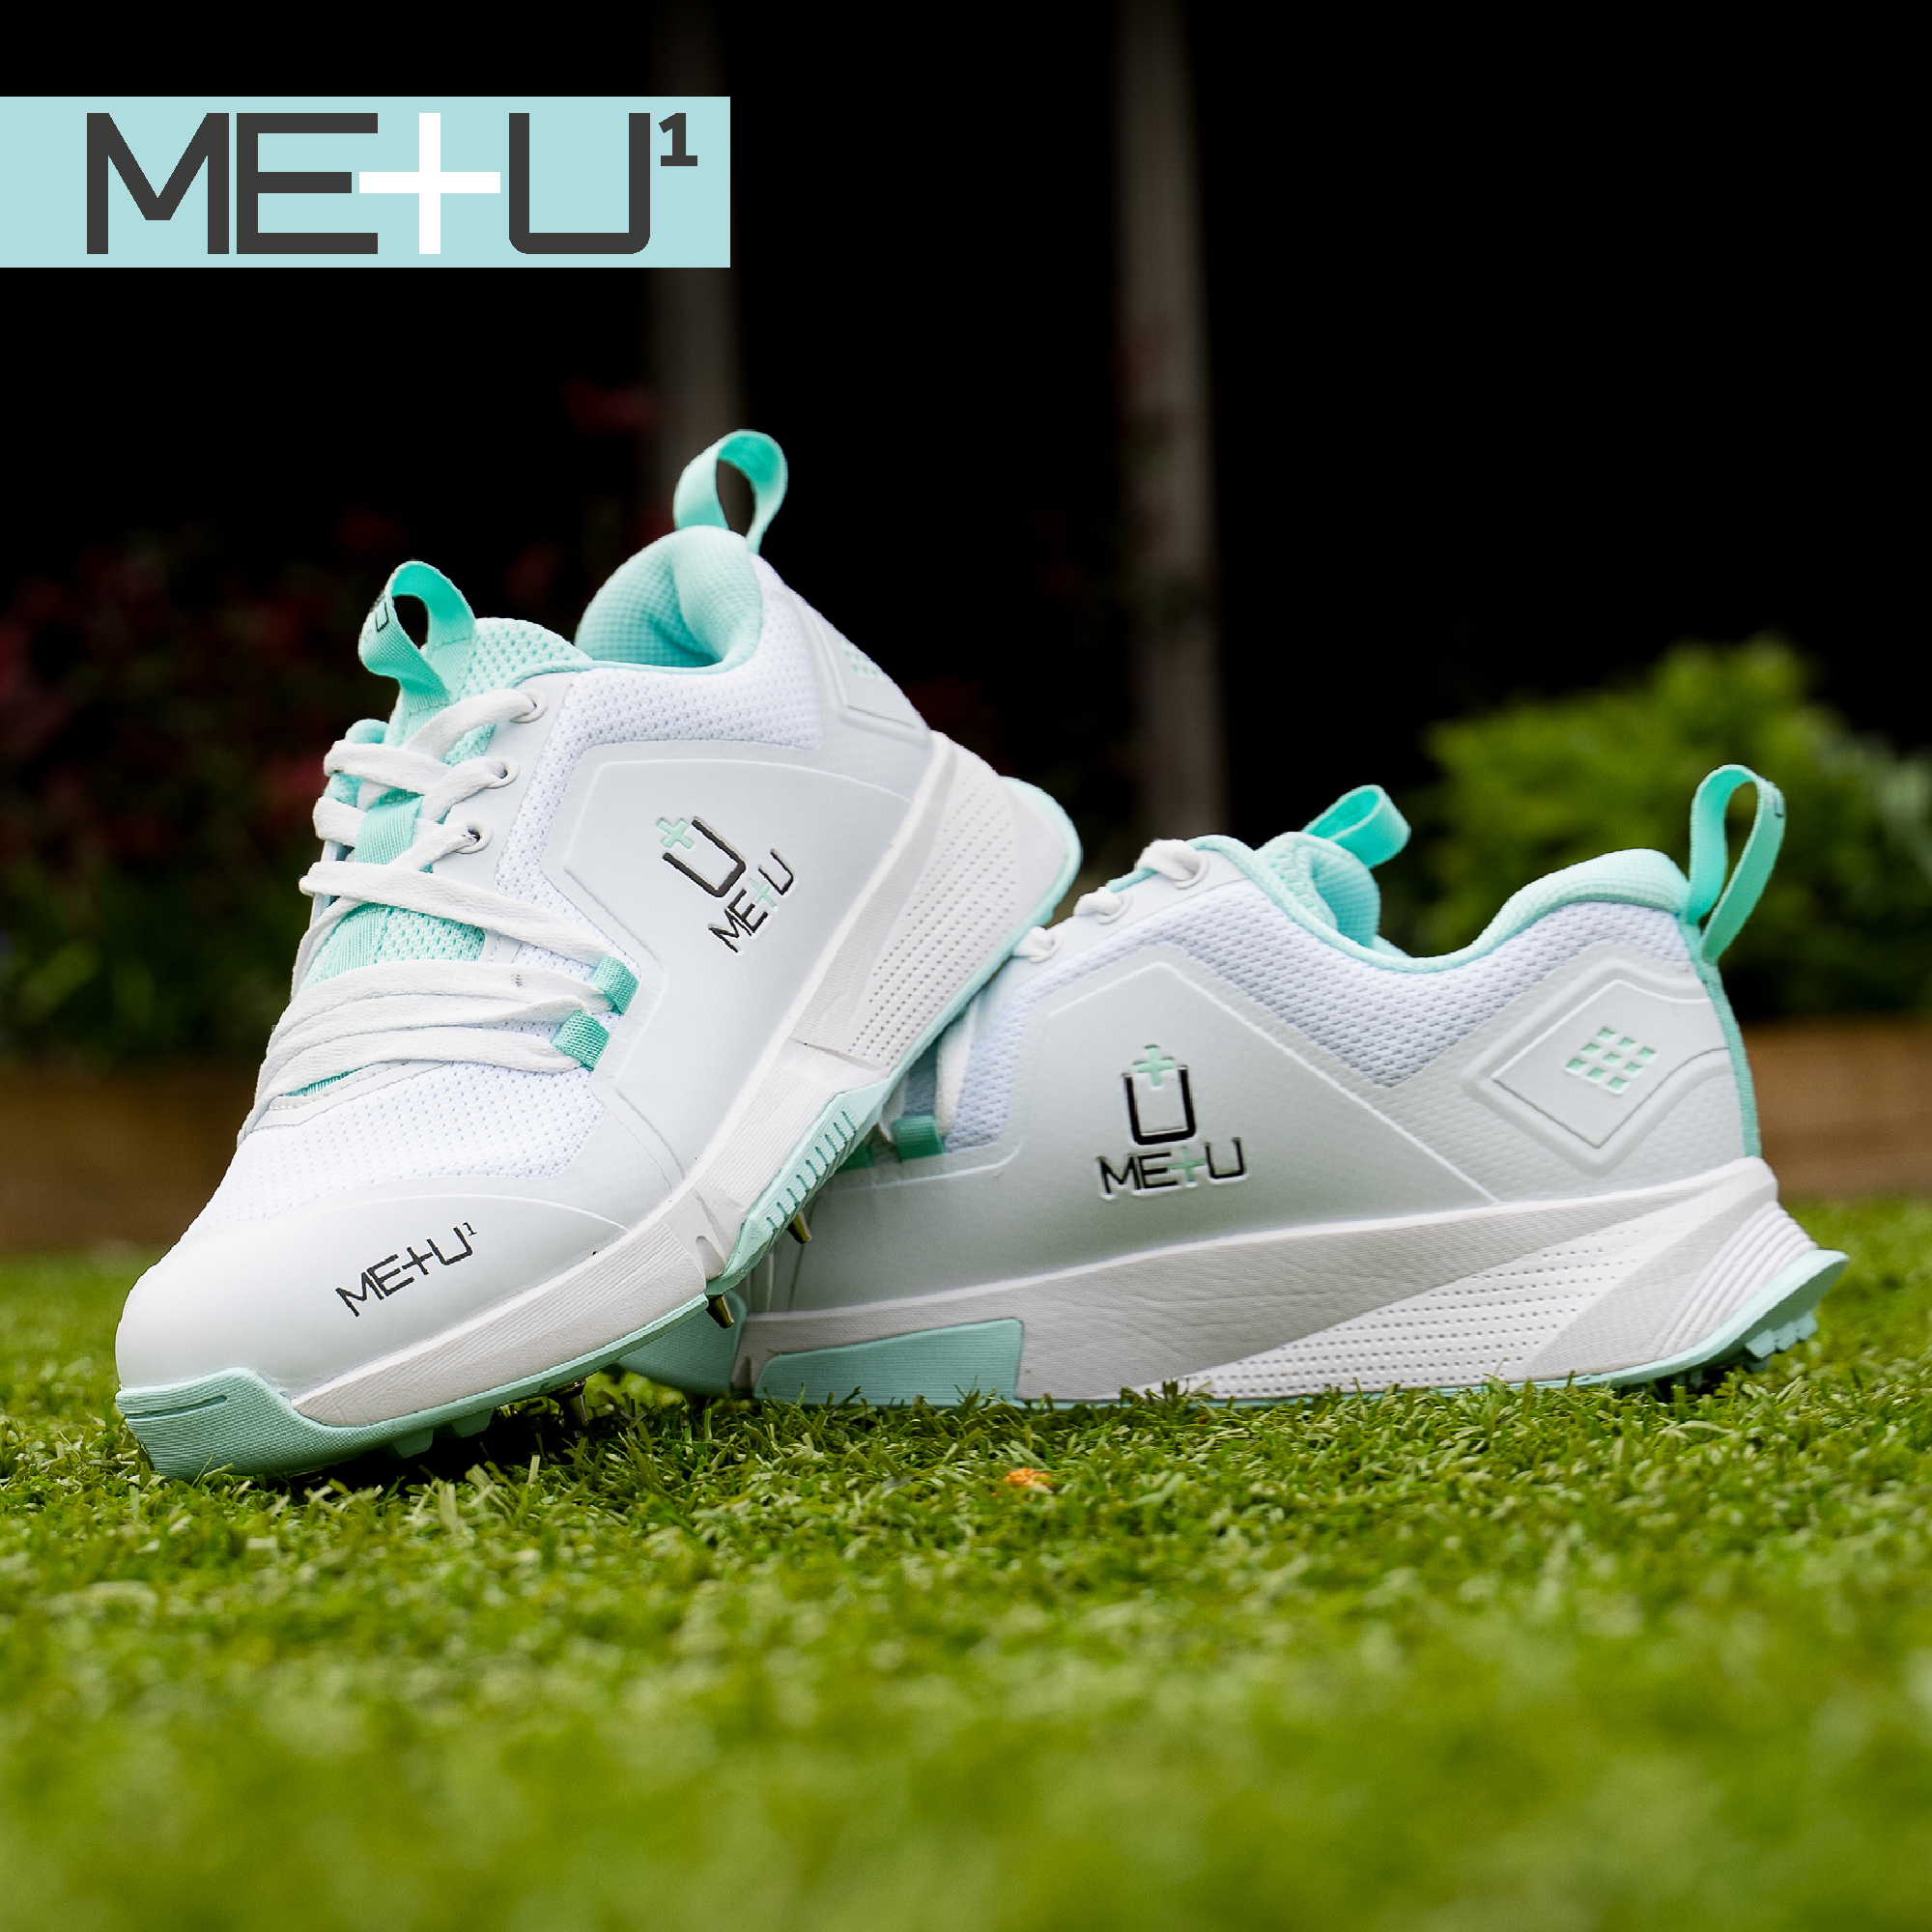 ME+U Womens Cricket Shoes with green trim on green grass